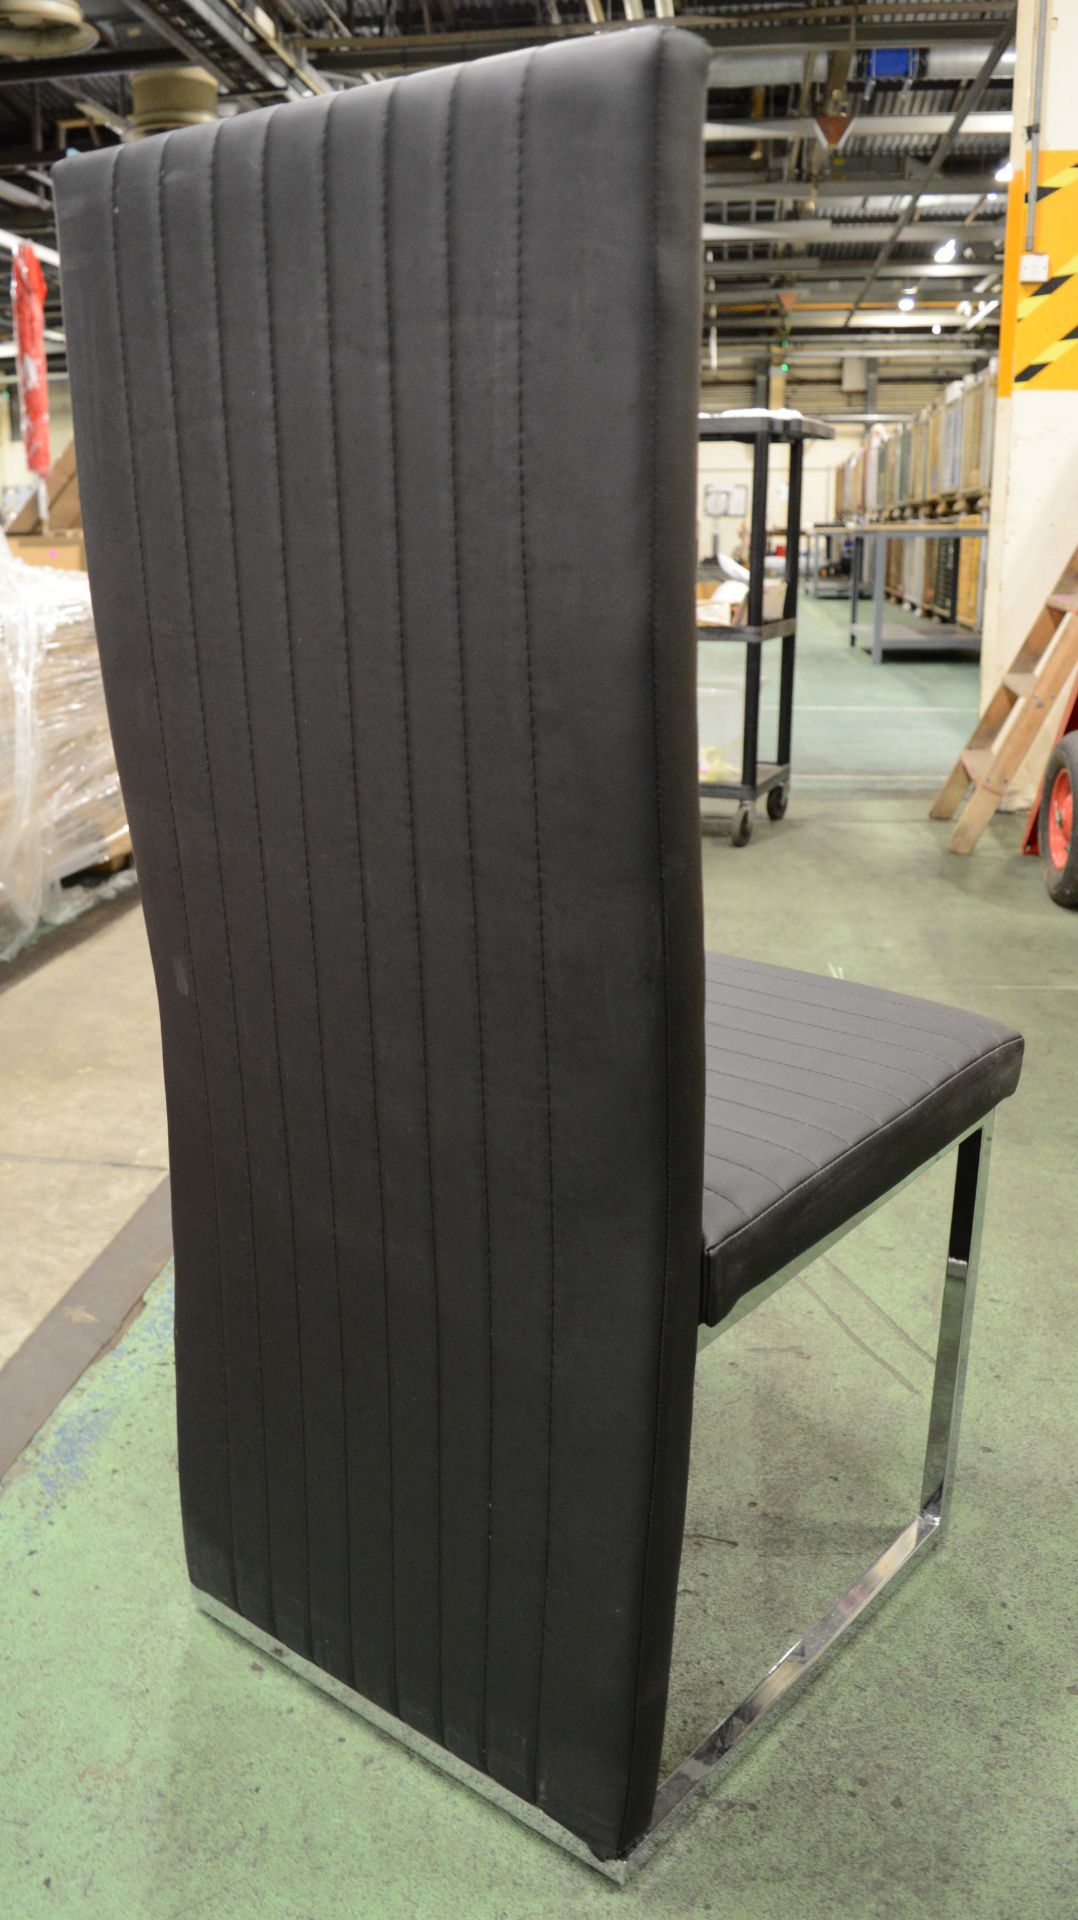 8x Chairs - New, but have stains to covering. RRP £700. - Image 3 of 5